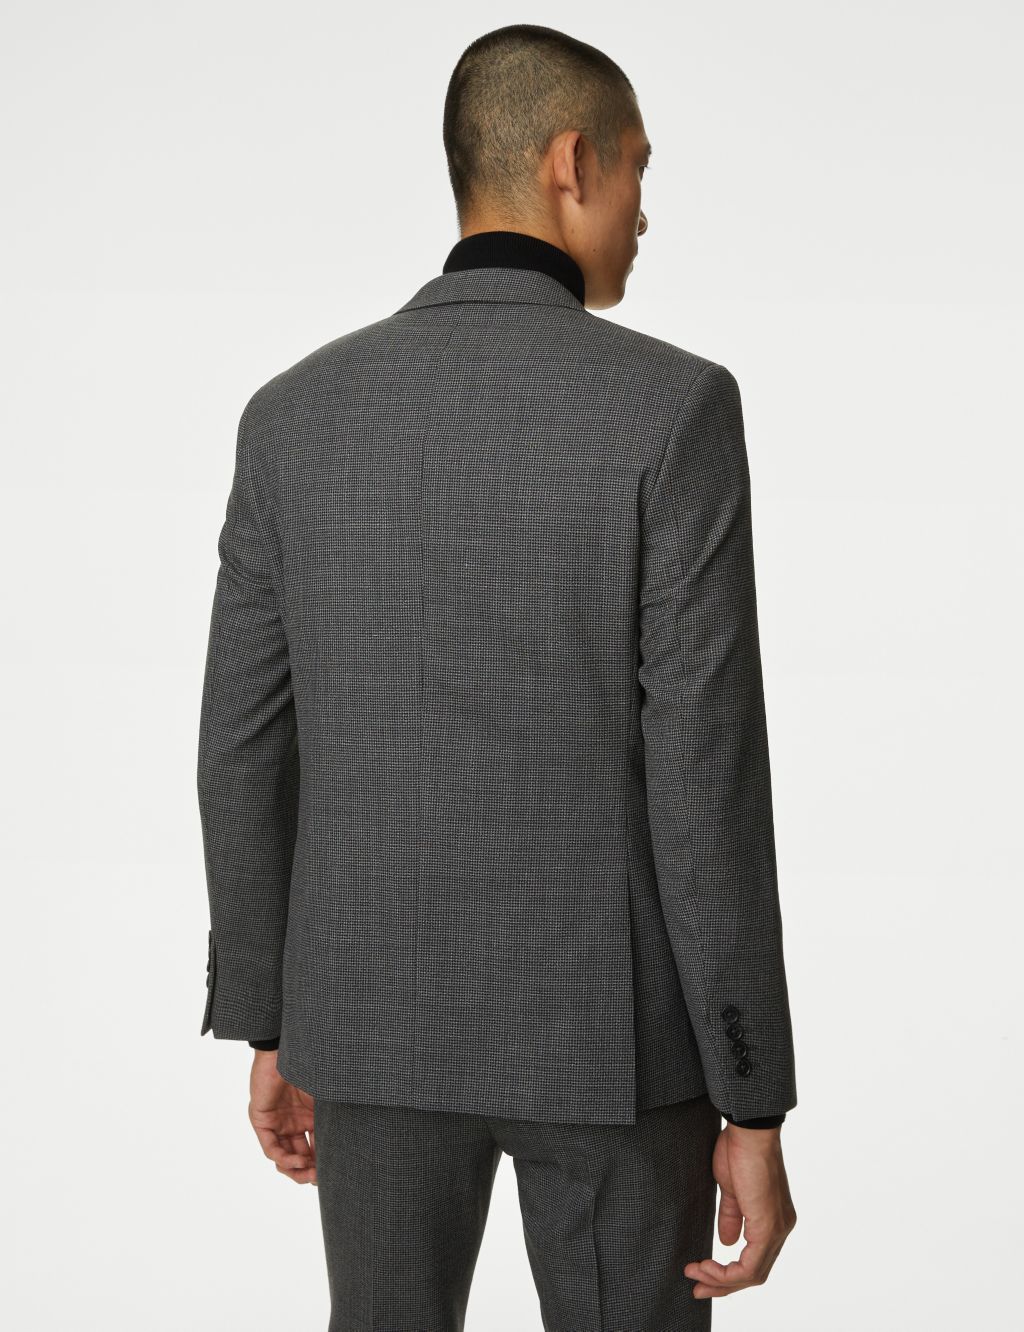 Tailored Fit Wool Blend Suit Jacket image 5